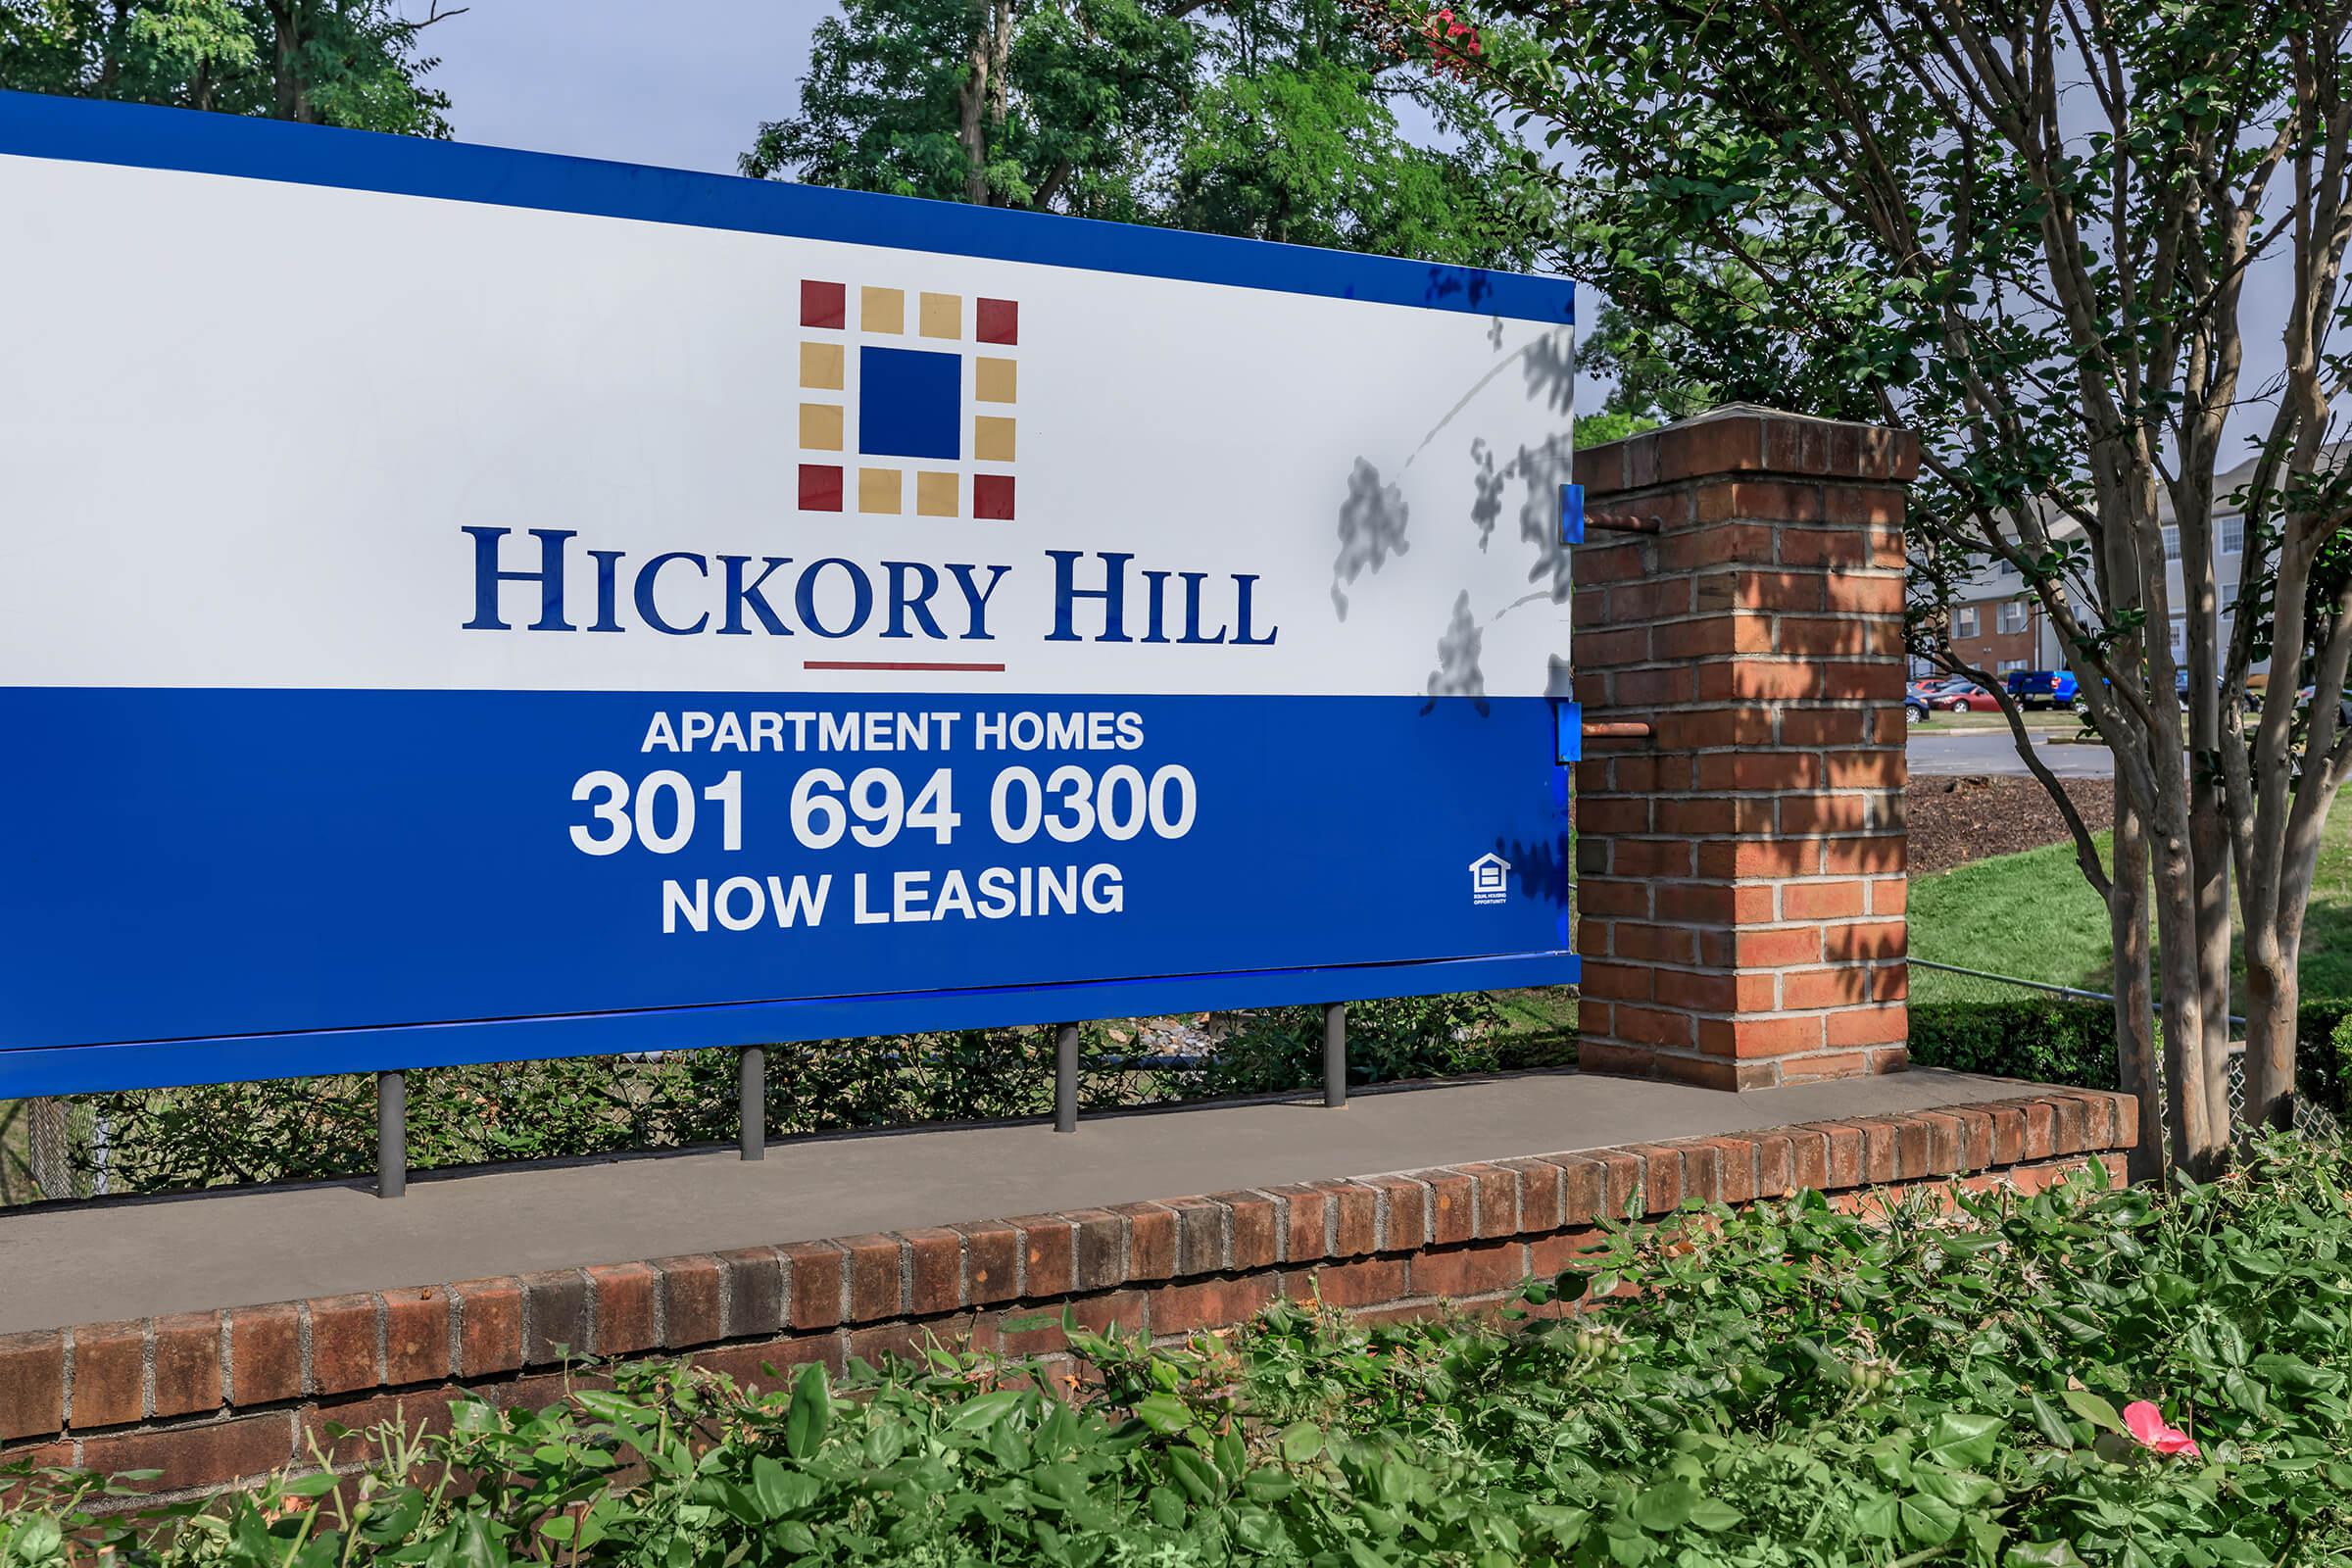 HICKORY HILL APARTMENTS